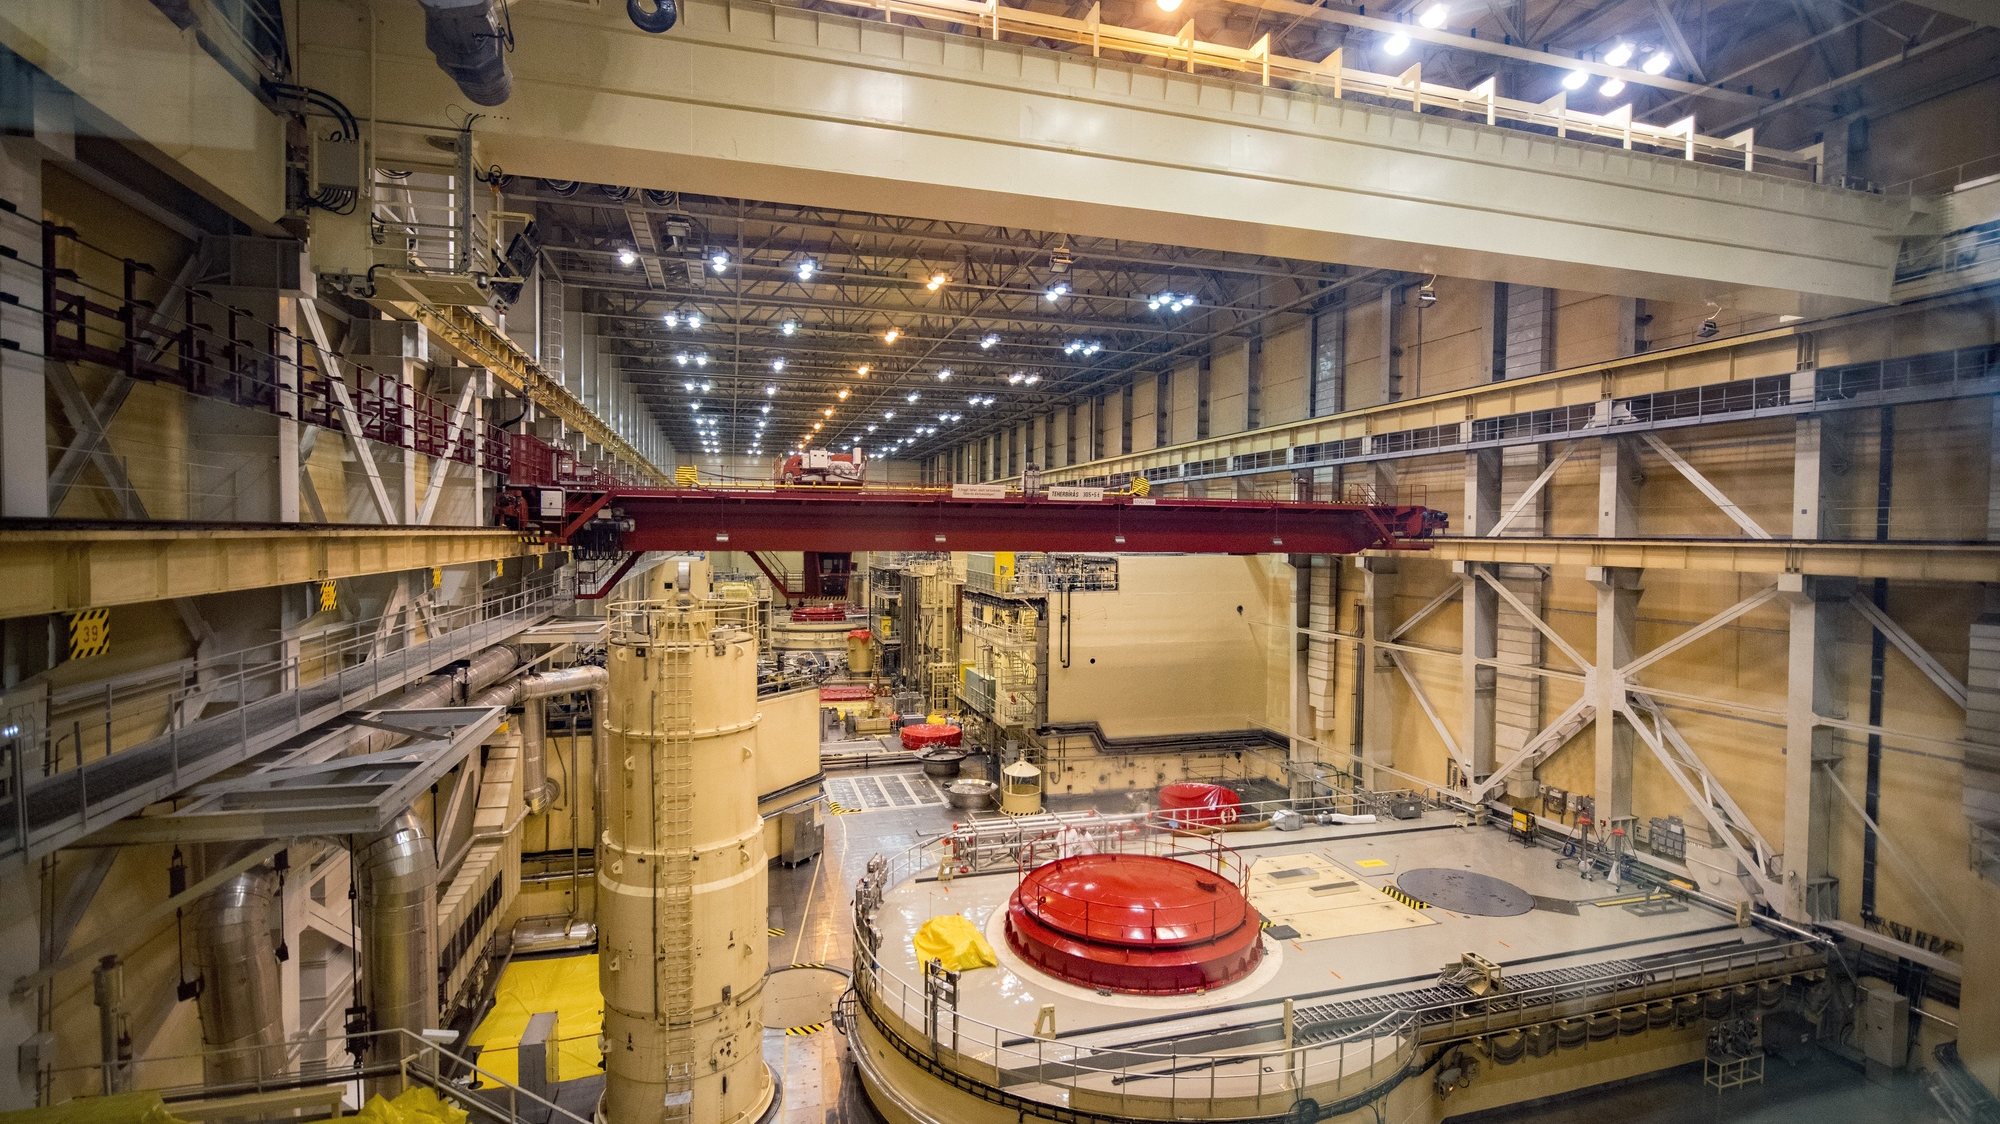 epa07672719 A general view of the Number 4 Reactor of the Paks Nuclear Power Plant in Paks, Hungary, 25 June 2019. The Paks Nuclear Power Plant is the first and only operating nuclear power station in Hungary. Altogether, its four reactors produce 35 to 40 percent of Hungary&#039;s electricity production.  EPA/TAMAS SOKI HUNGARY OUT